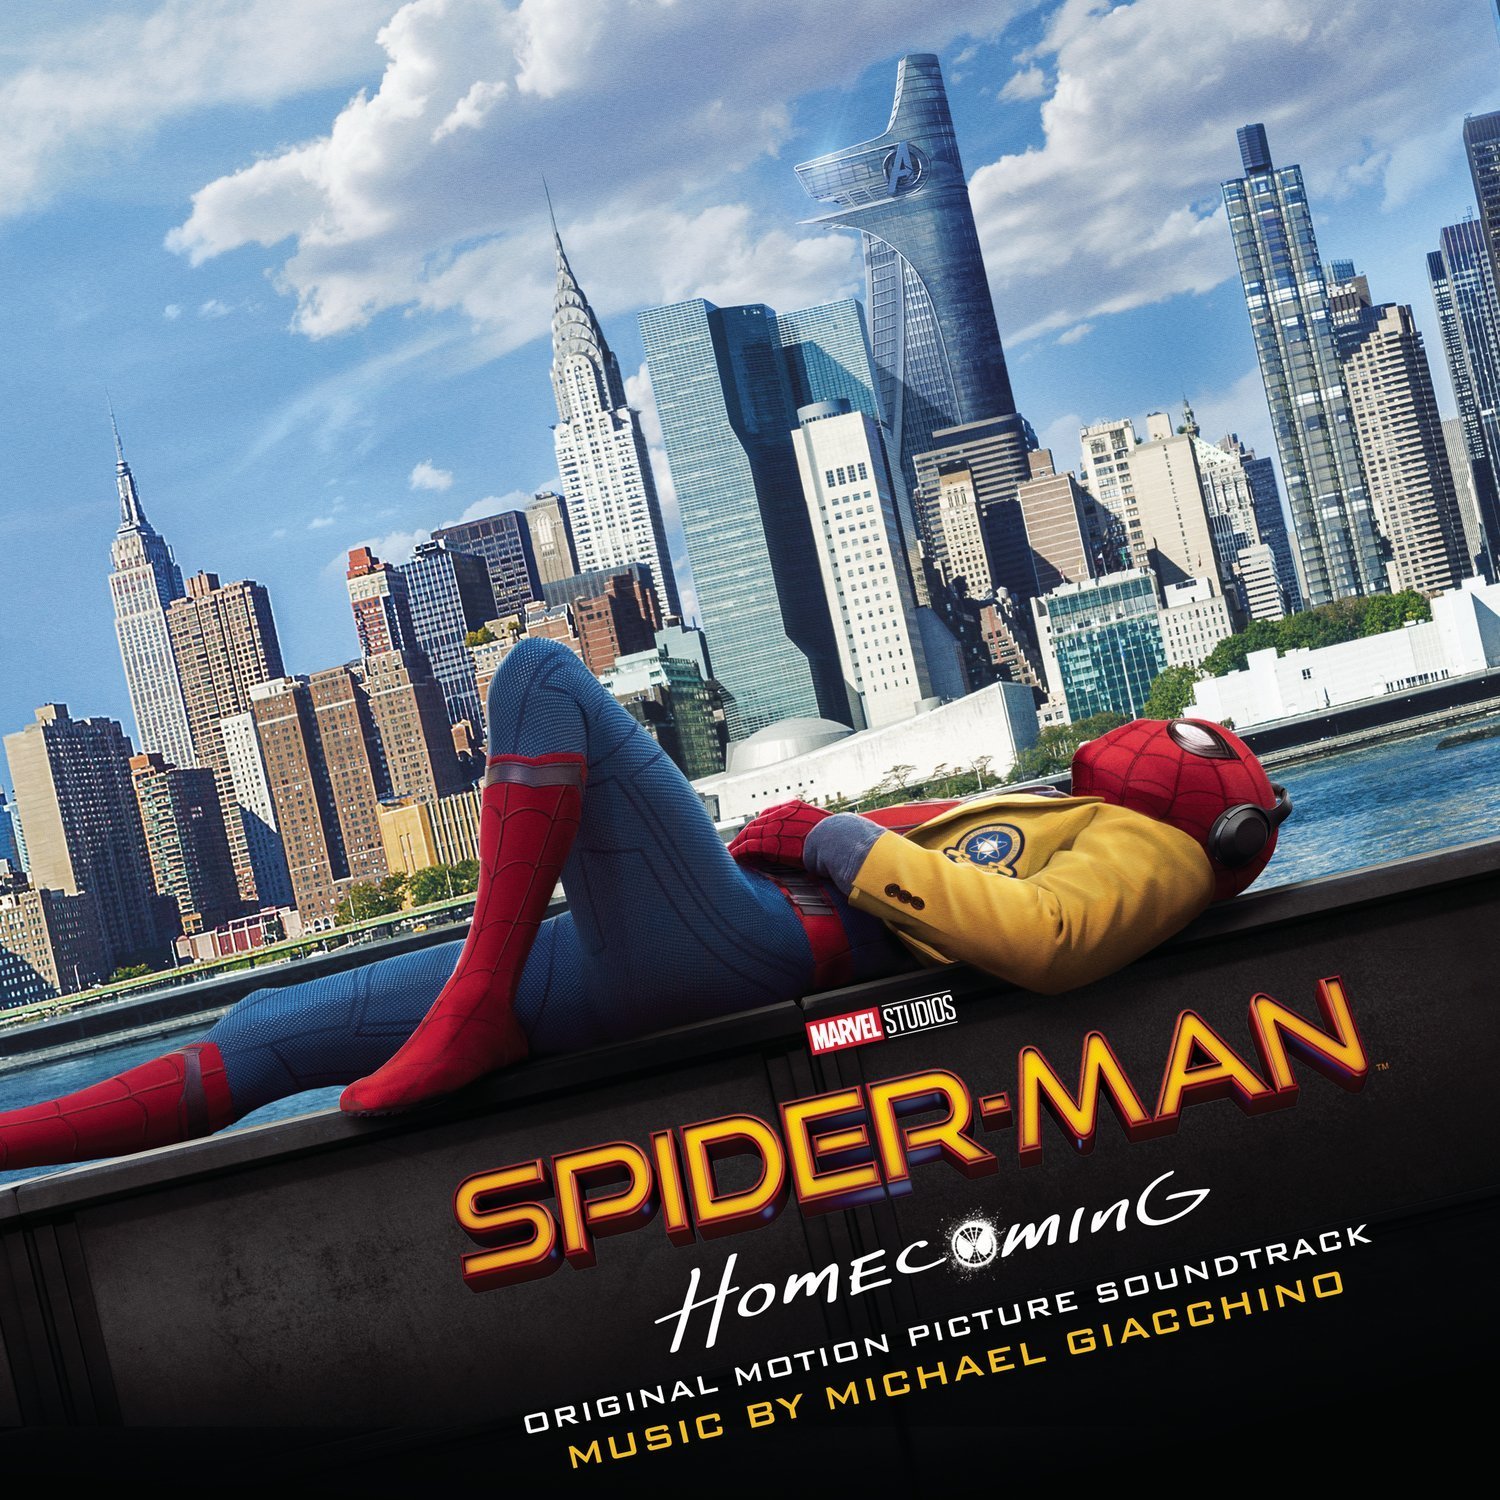 ost 07 17 Spiderman Home